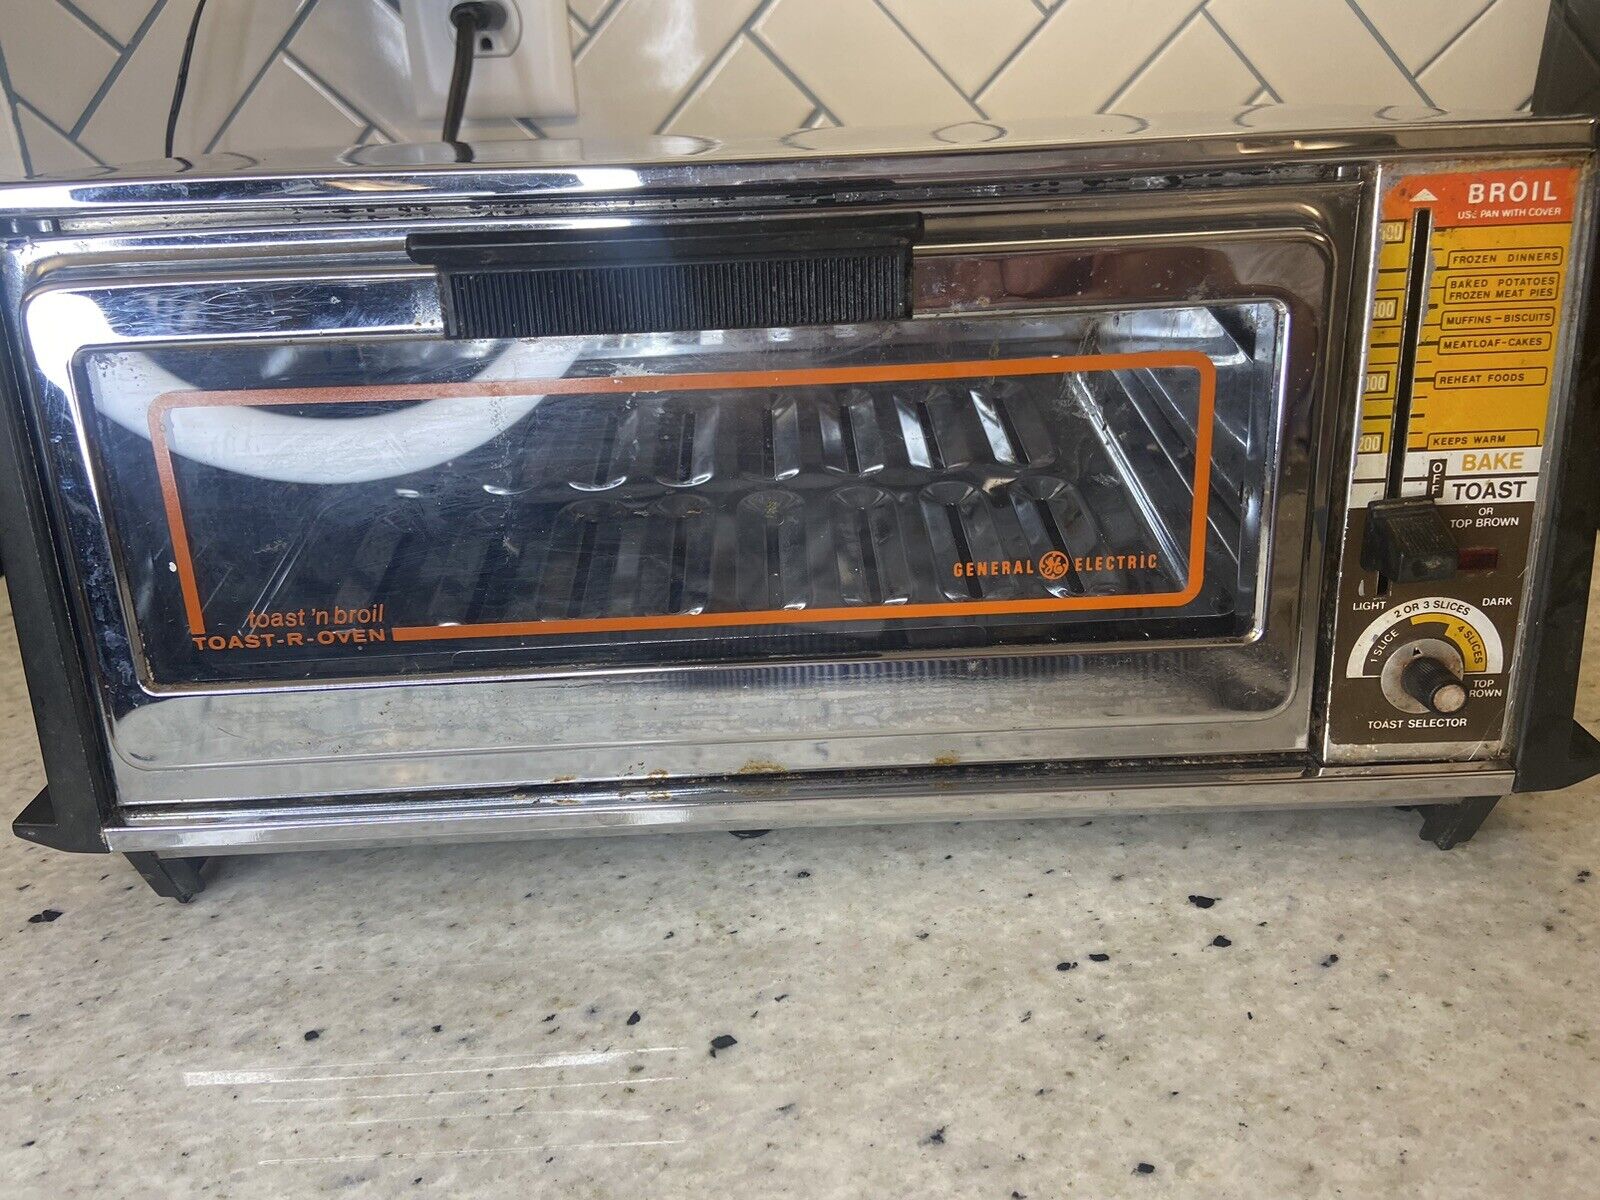 Vintage GE General Electric Toast N Broil Toaster Oven A23126 Chrome READ